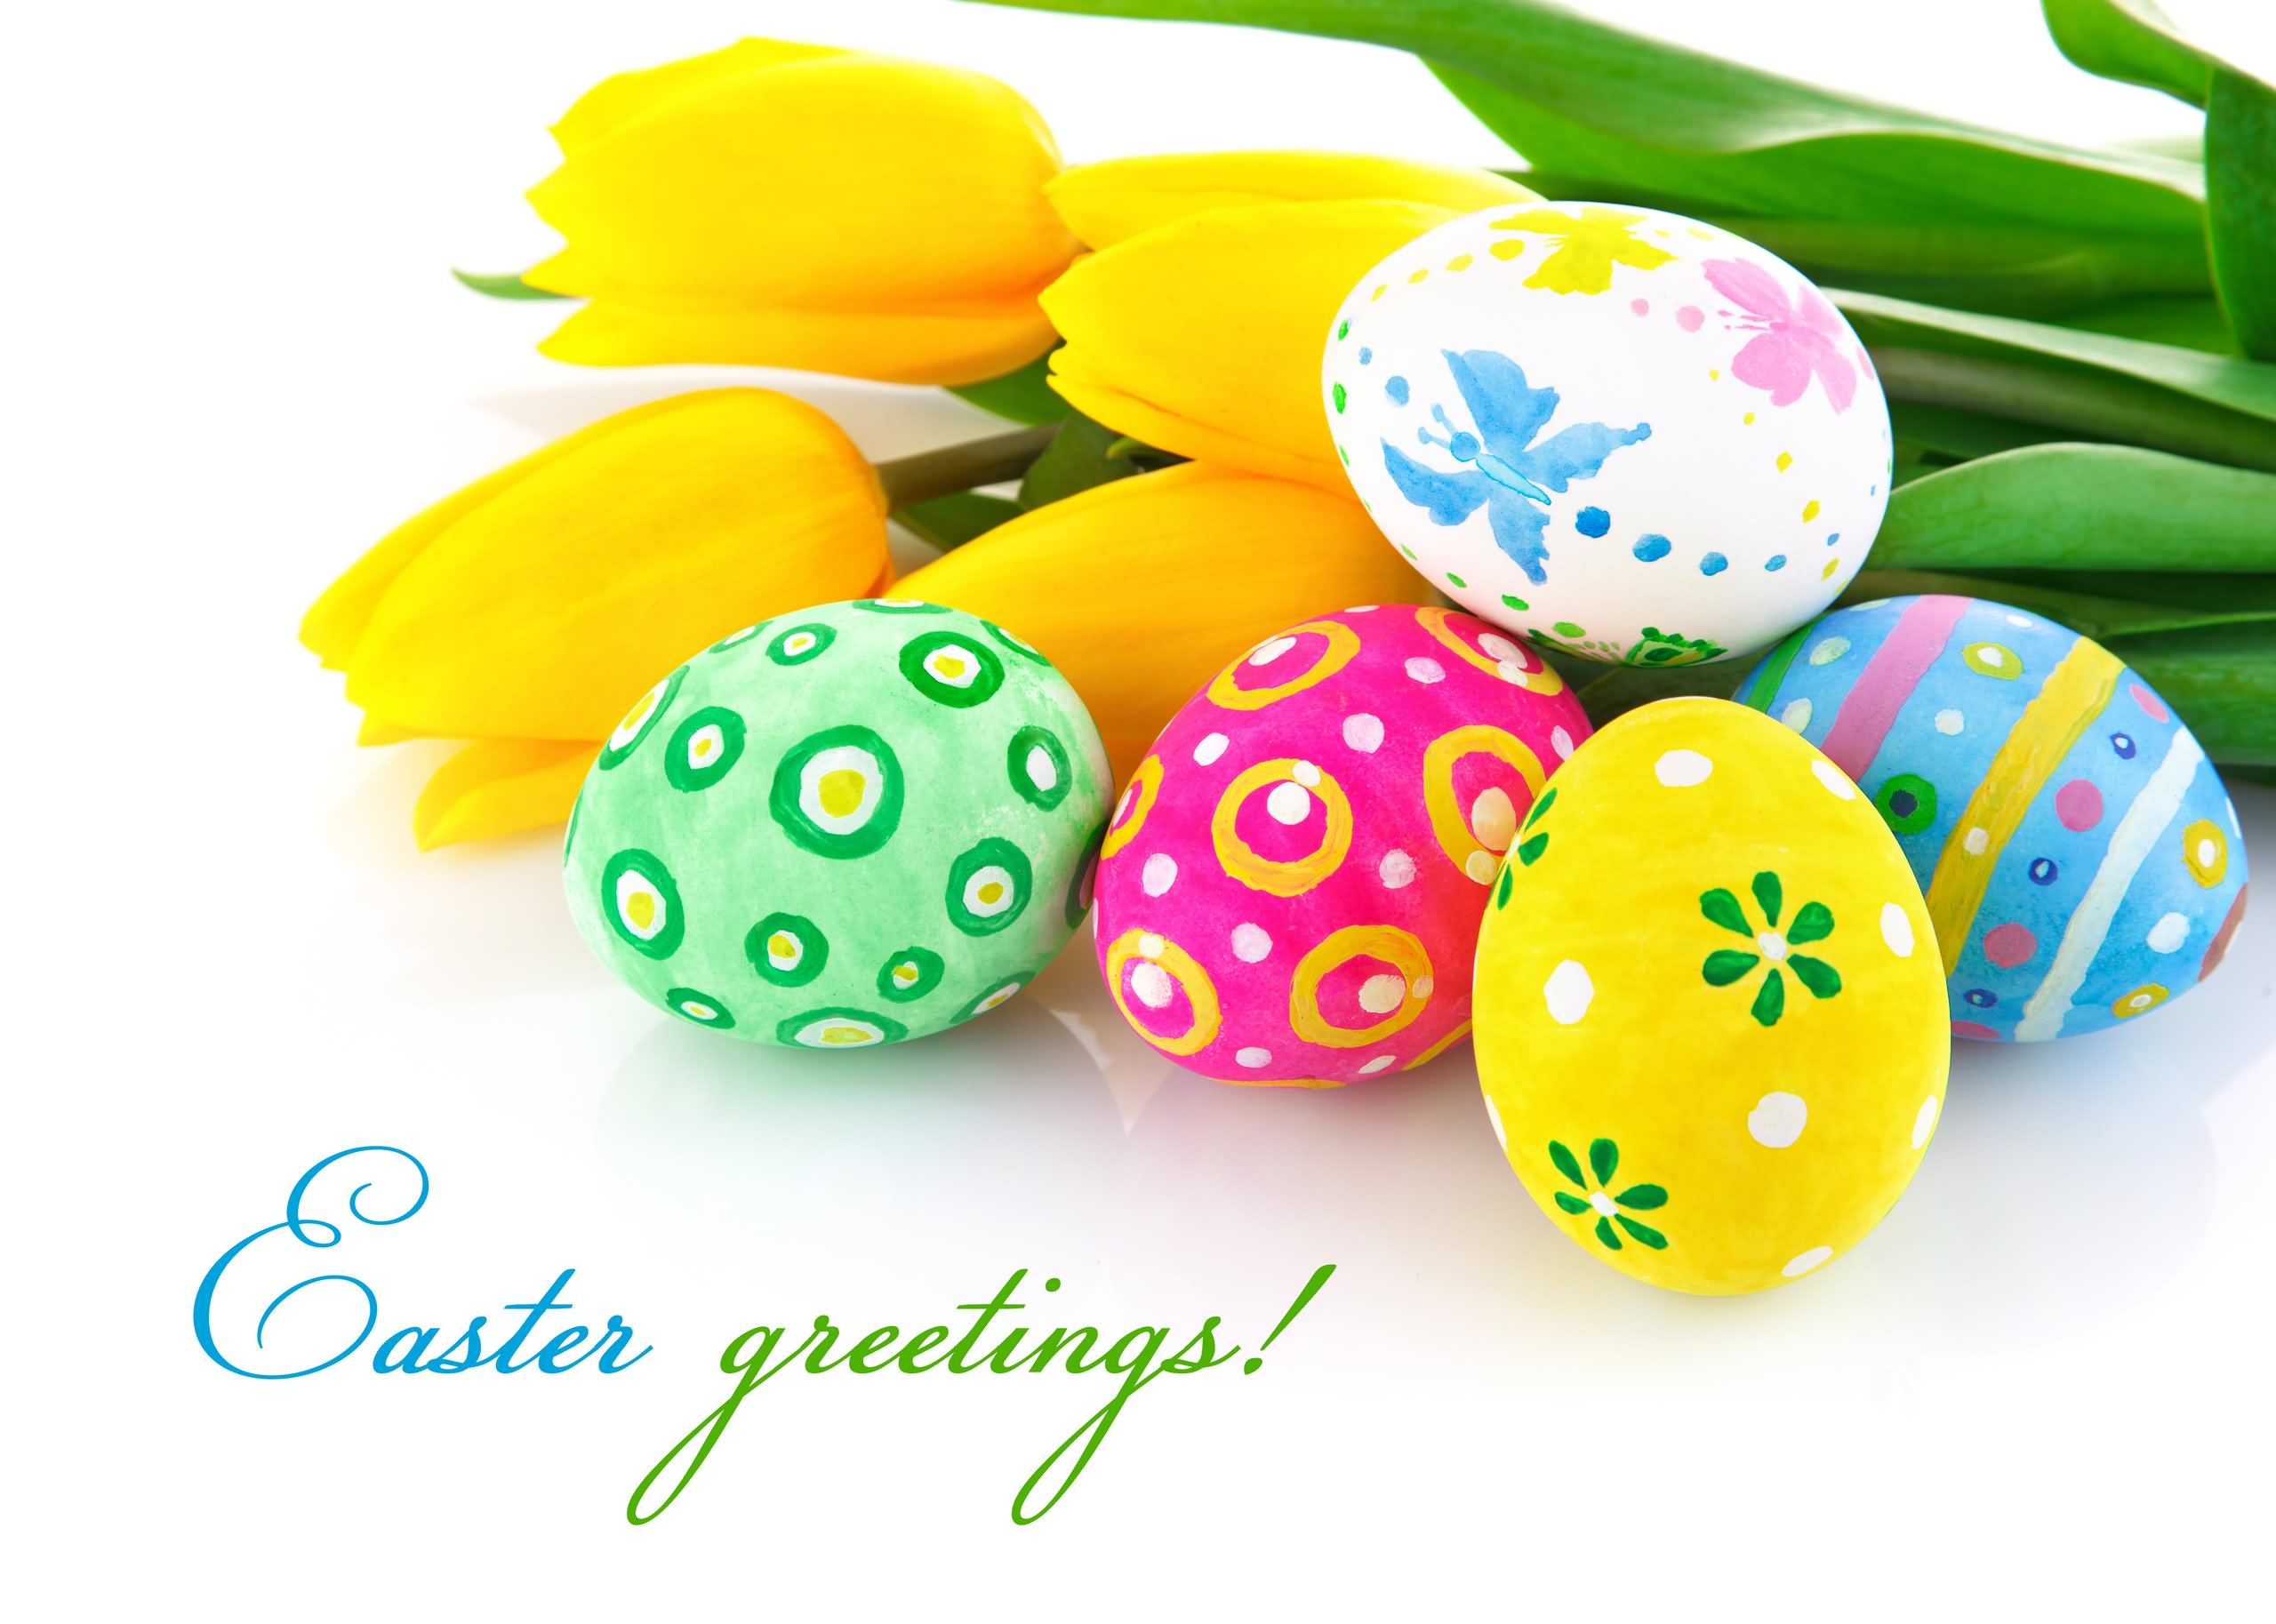 Easter Greetings Picture